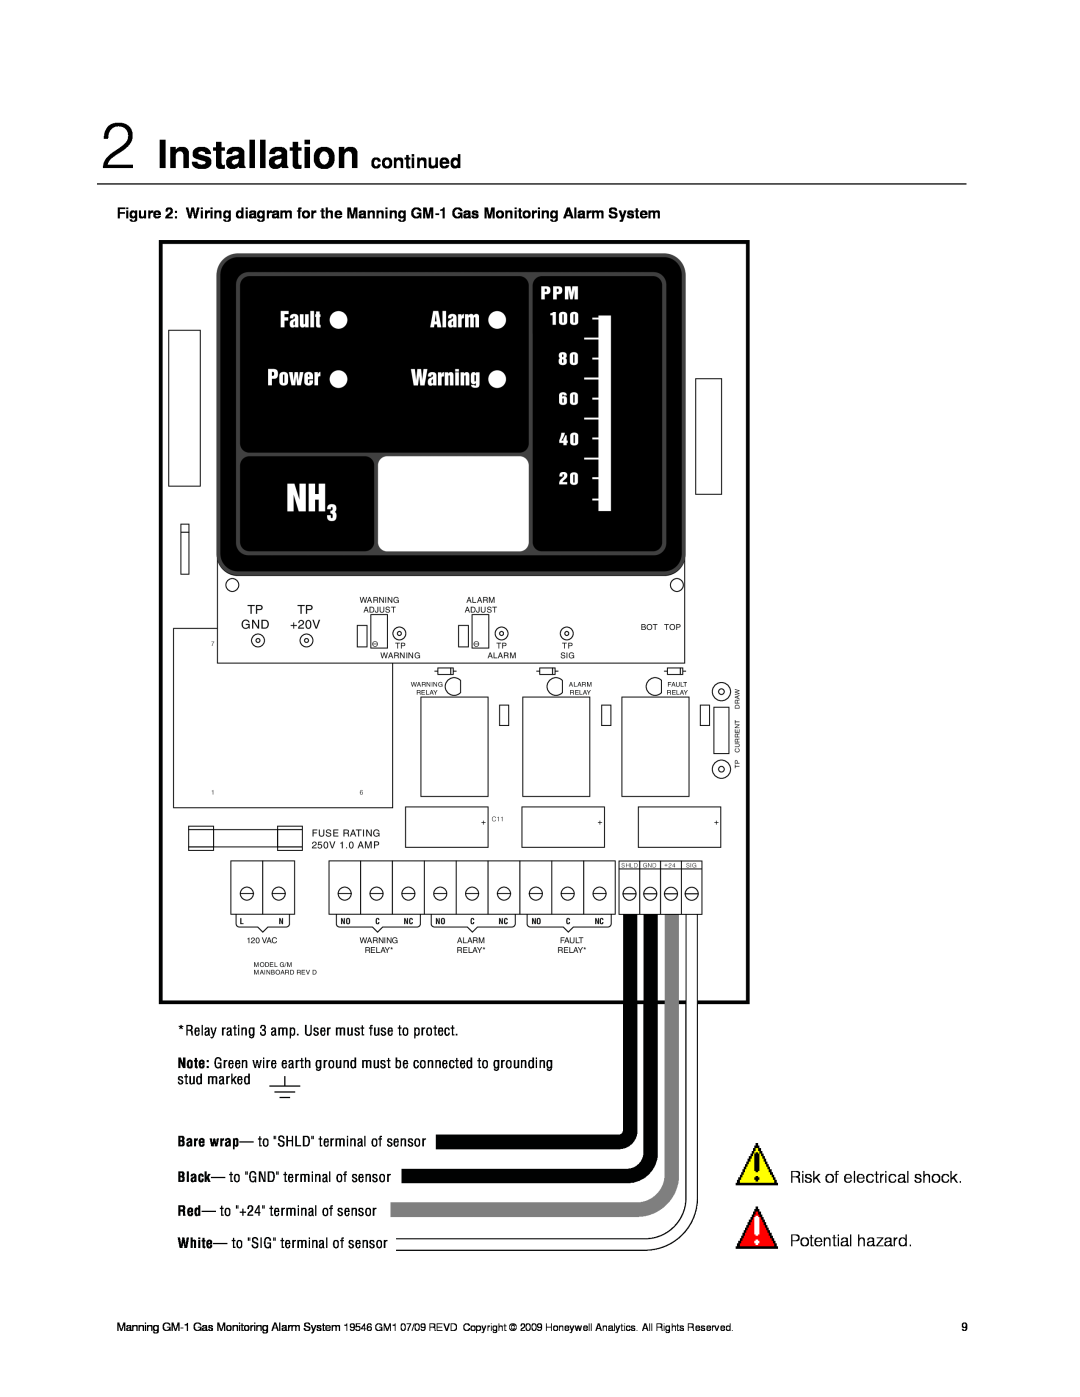 Honeywell 19546GM1, GM-1 installation manual Installation continued, Risk of electrical shock Potential hazard 